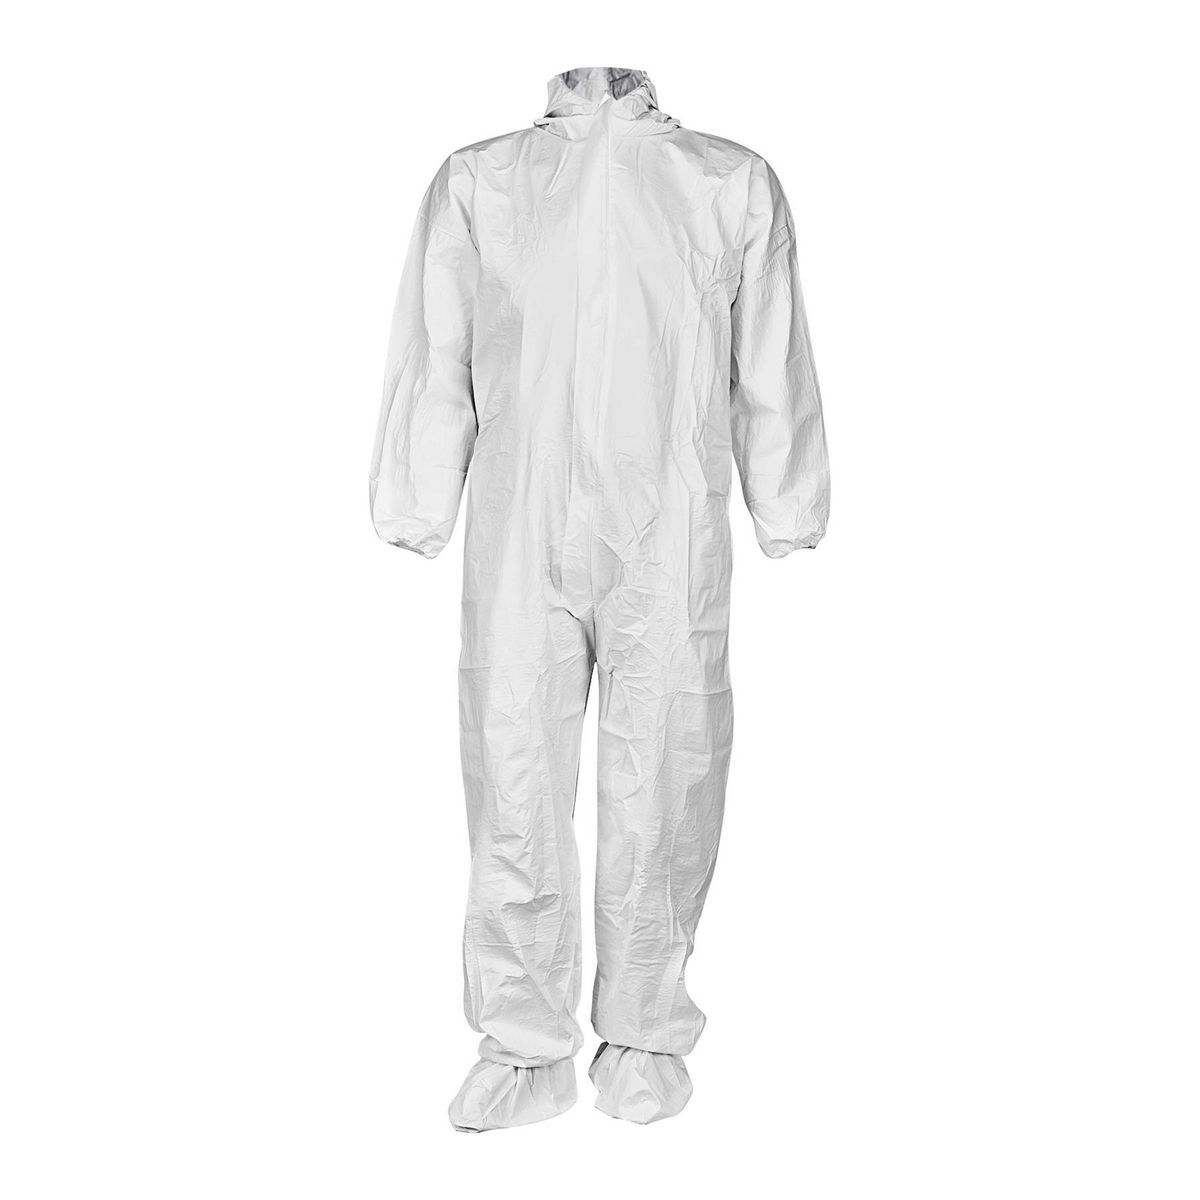 Full Coverage Disposable Protective Suit, XX-Large